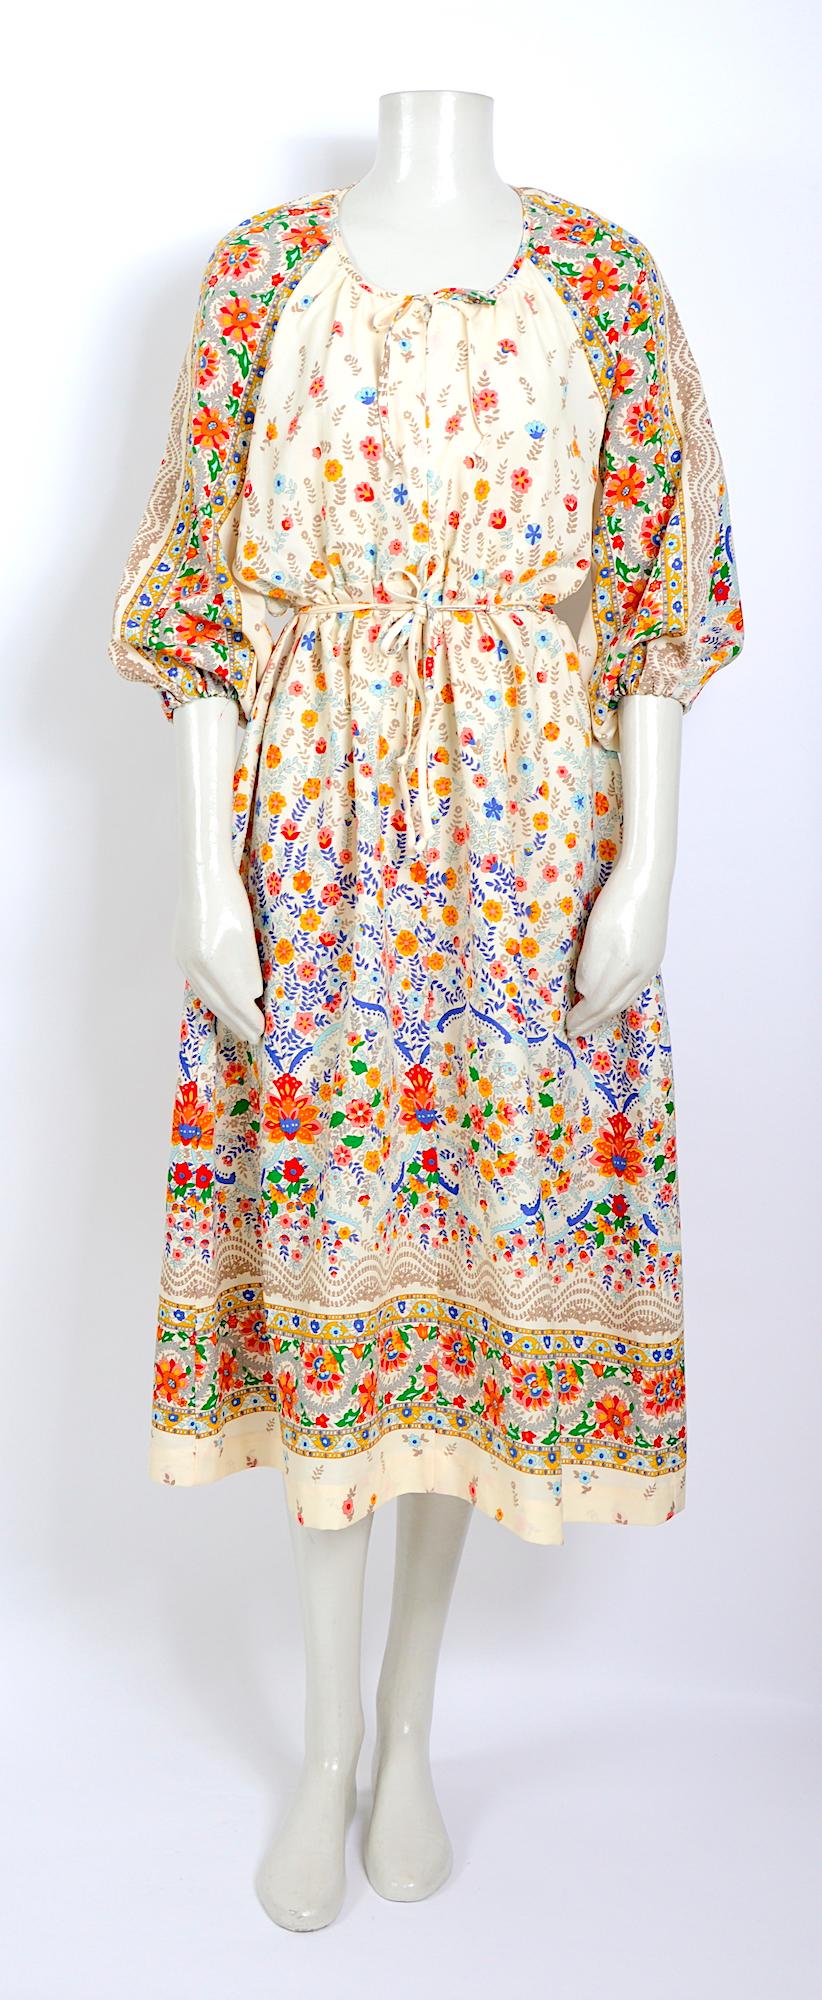 Rare vintage Christian Dior lounge wear boho/hippy colorful floral dress.
Size M - Unlined - Front zip closure - Material polyester
Measurements taken flat:
Ua to Ua 22inch/56cm(x2) - Waist 20inch/51cm(x2) - Hip free - Total length  48inch/122cm
